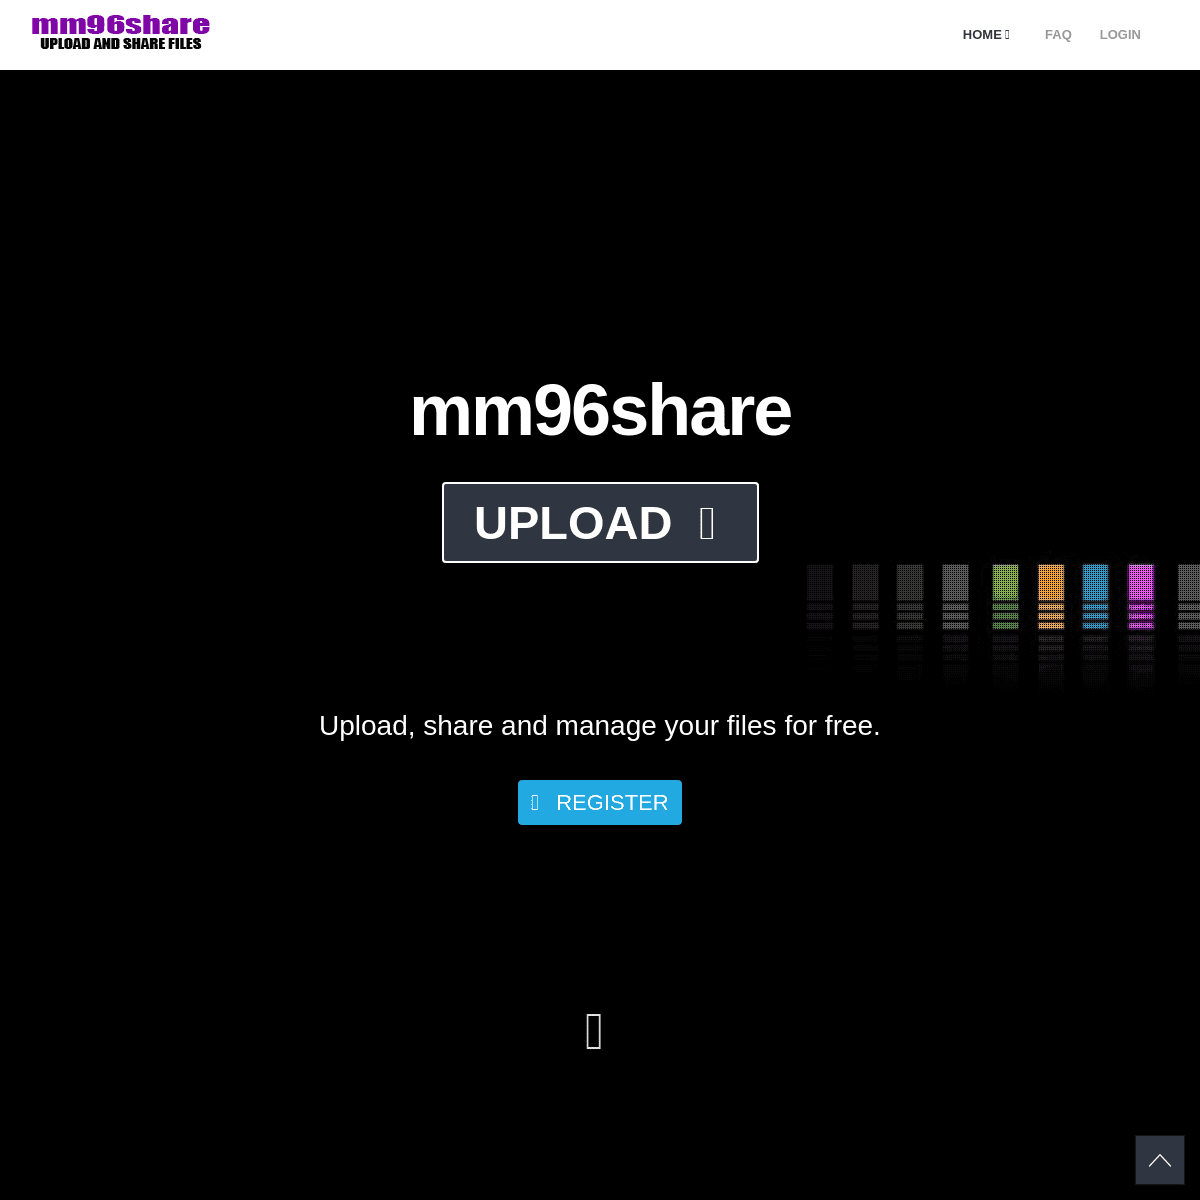 A complete backup of mm96share.com